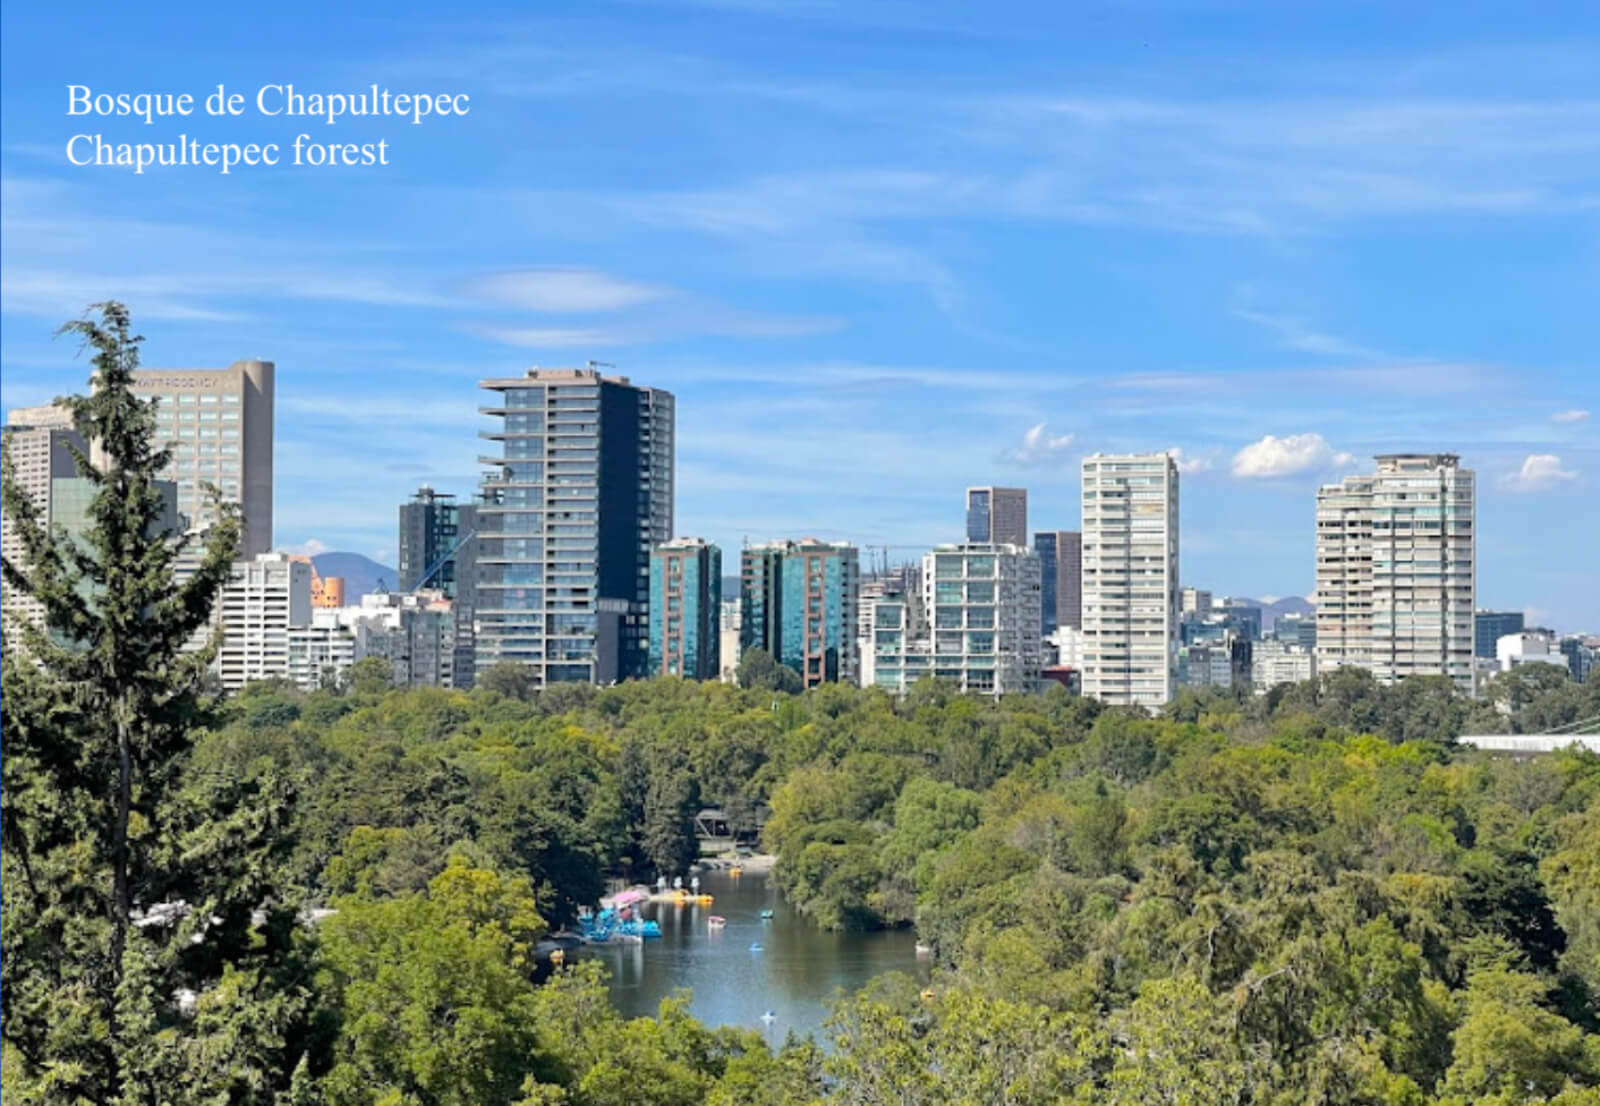 Condominium with a terrace of 20 m2, height of 3.10 meters, heliport, bar and restaurant, spa, gym, room service, in Paseo de la Reforma, Me